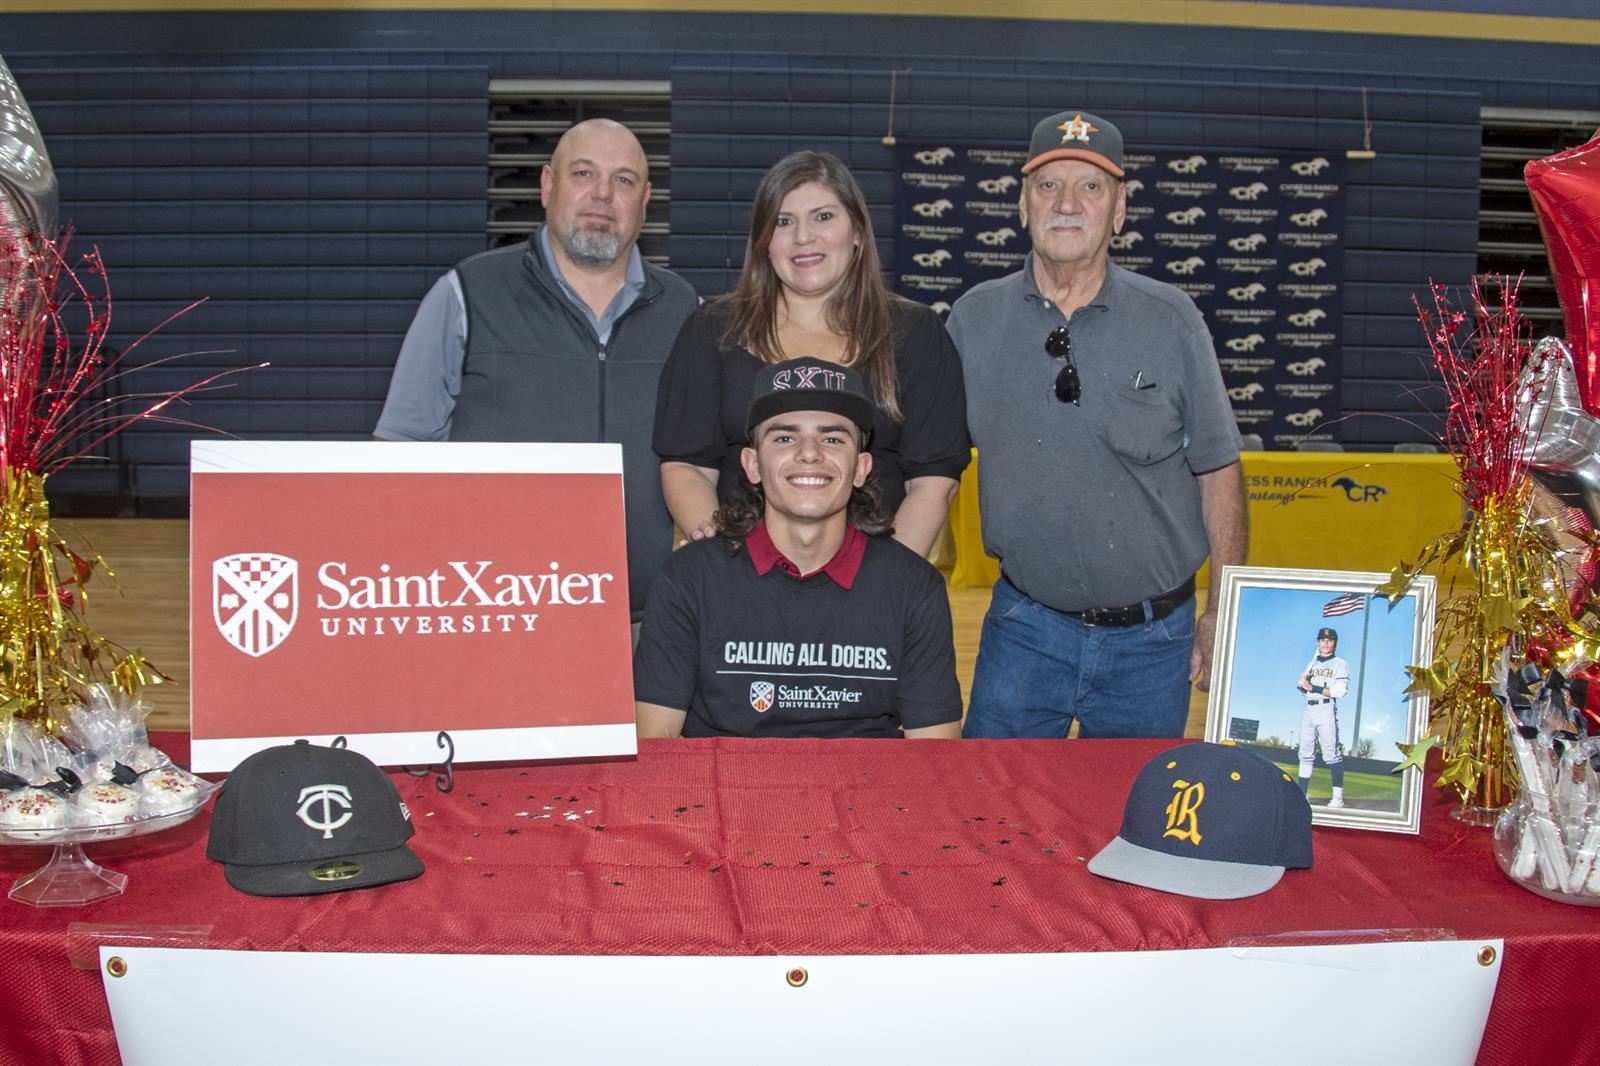 Cypress Ranch senior Connor Nicholas, seated, signed a letter of intent to play baseball at the Saint Xavier University.